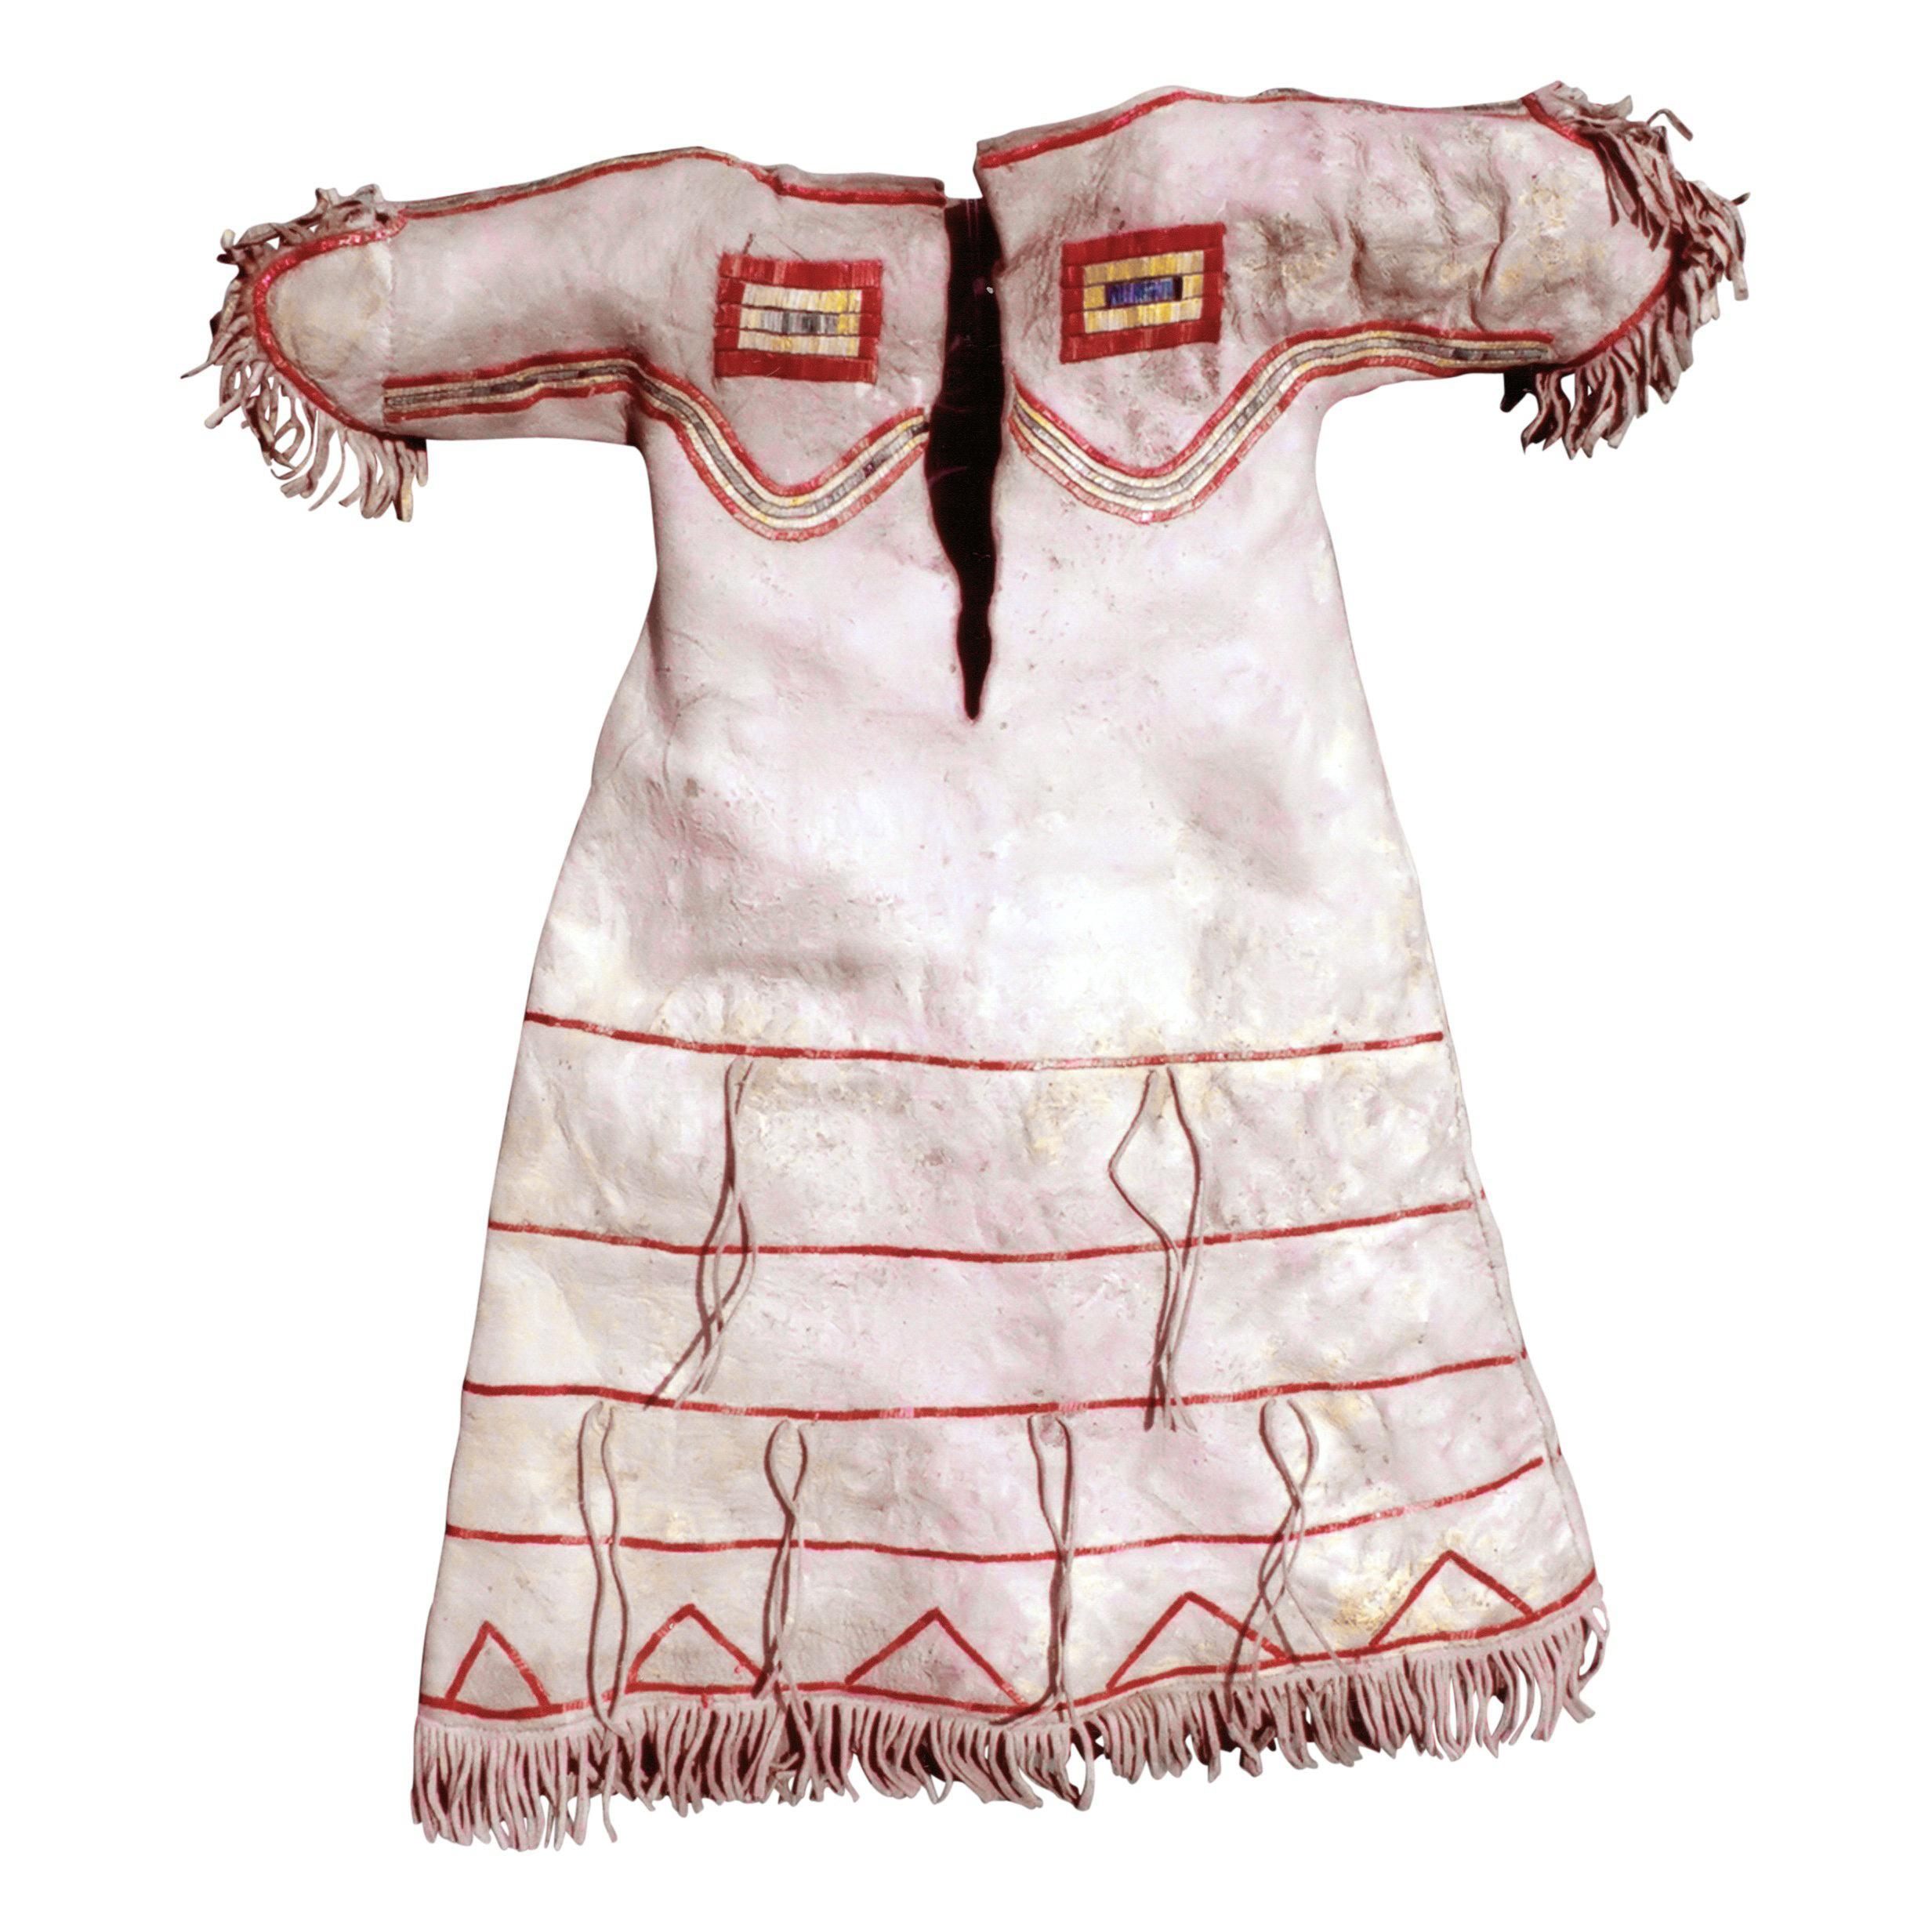 Lakota Sioux child's dress quilled on buffalo hide; collected and entered into the Maryland Academy of Art and Science prior to 1880. It was deaccessioned by the museum in 1968 to H. Bruce Greene, then curator of the museum.

Period: circa